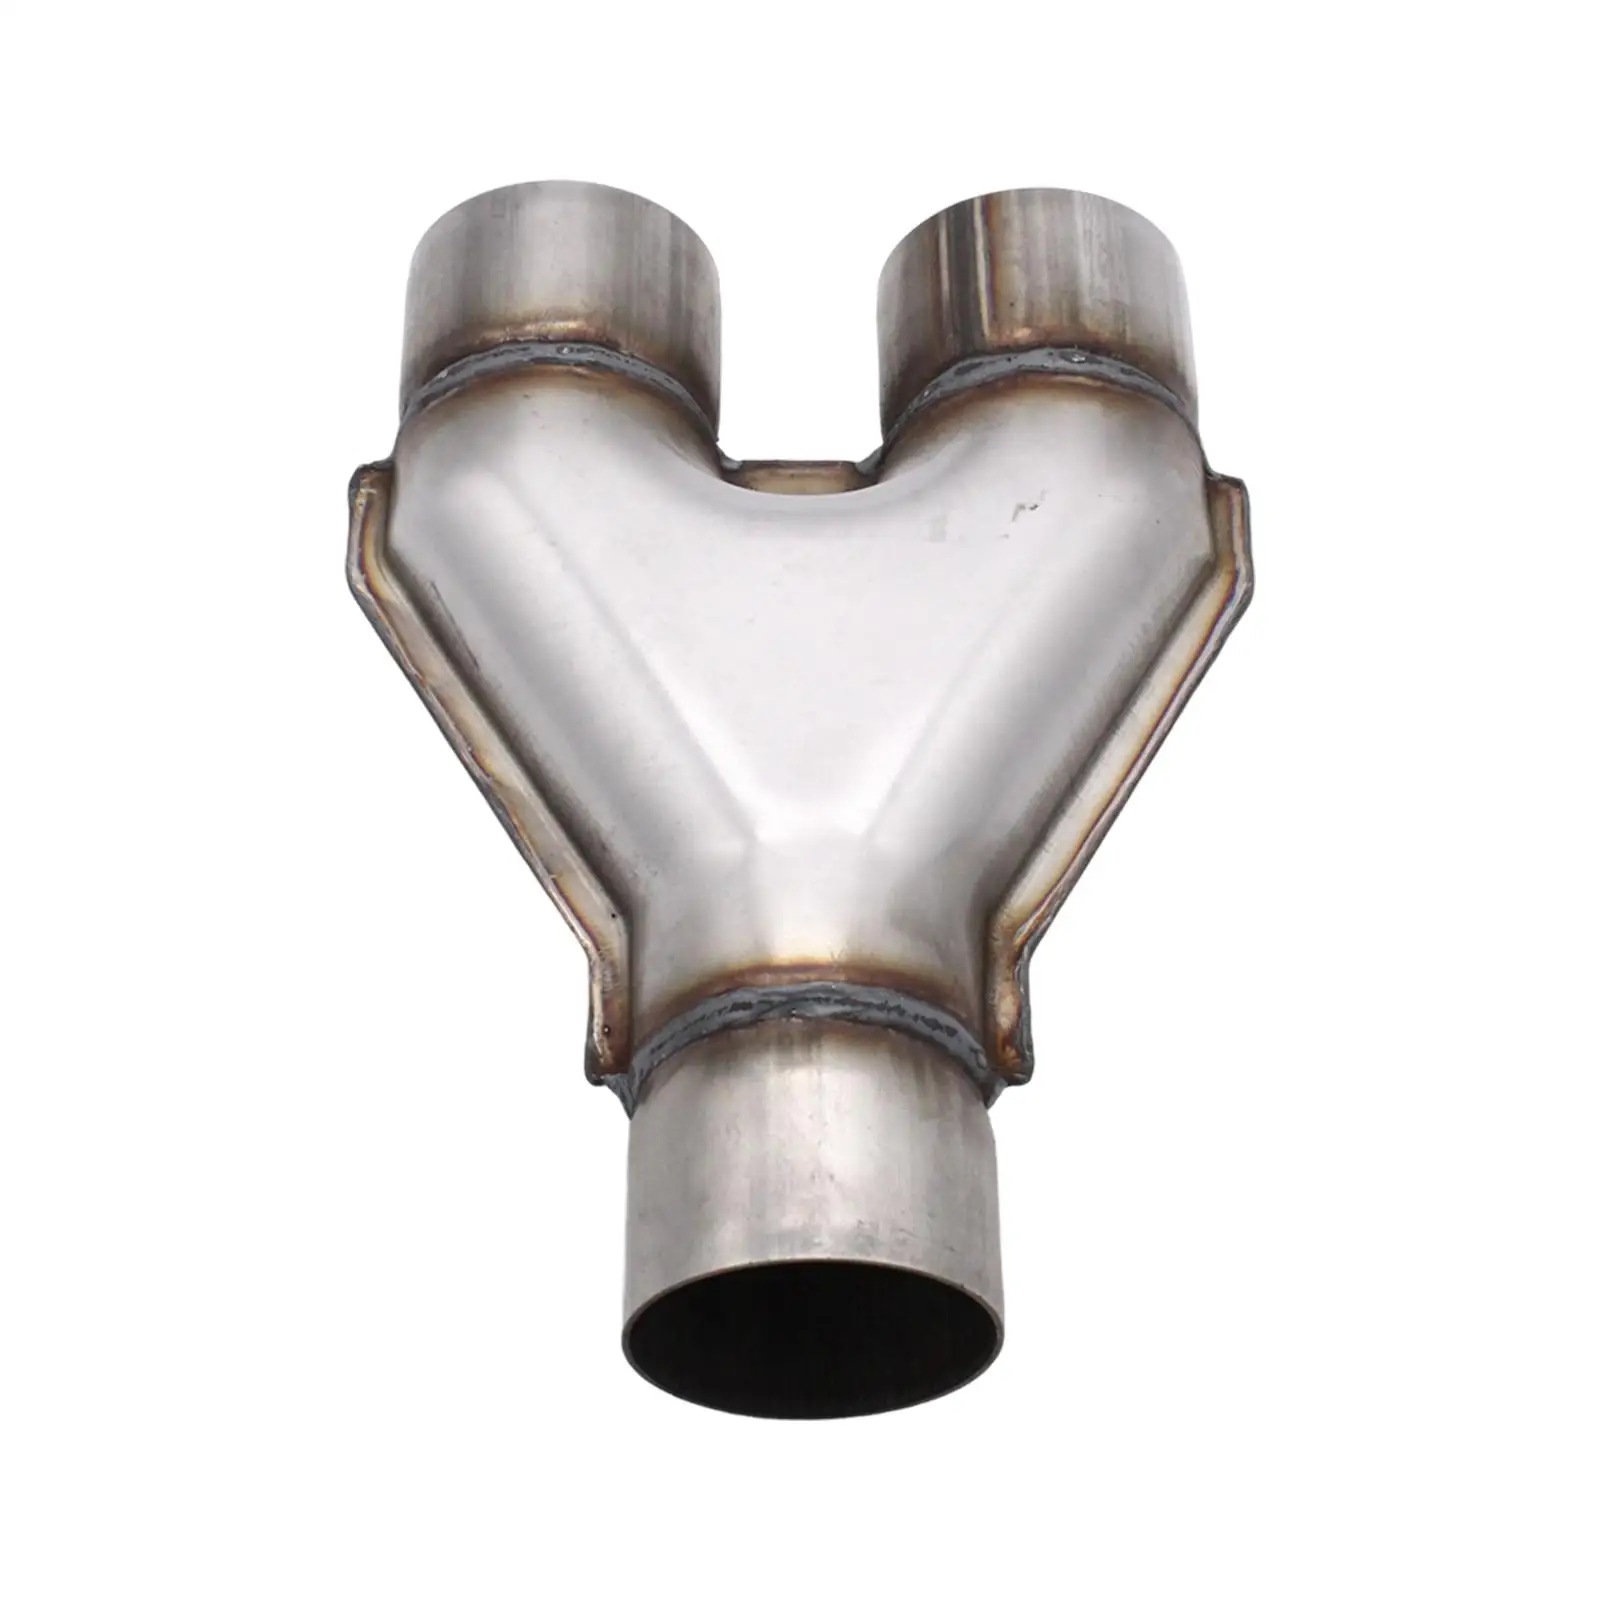 Exhaust Pipe Accessory for Replacement Convenient Installation Durable